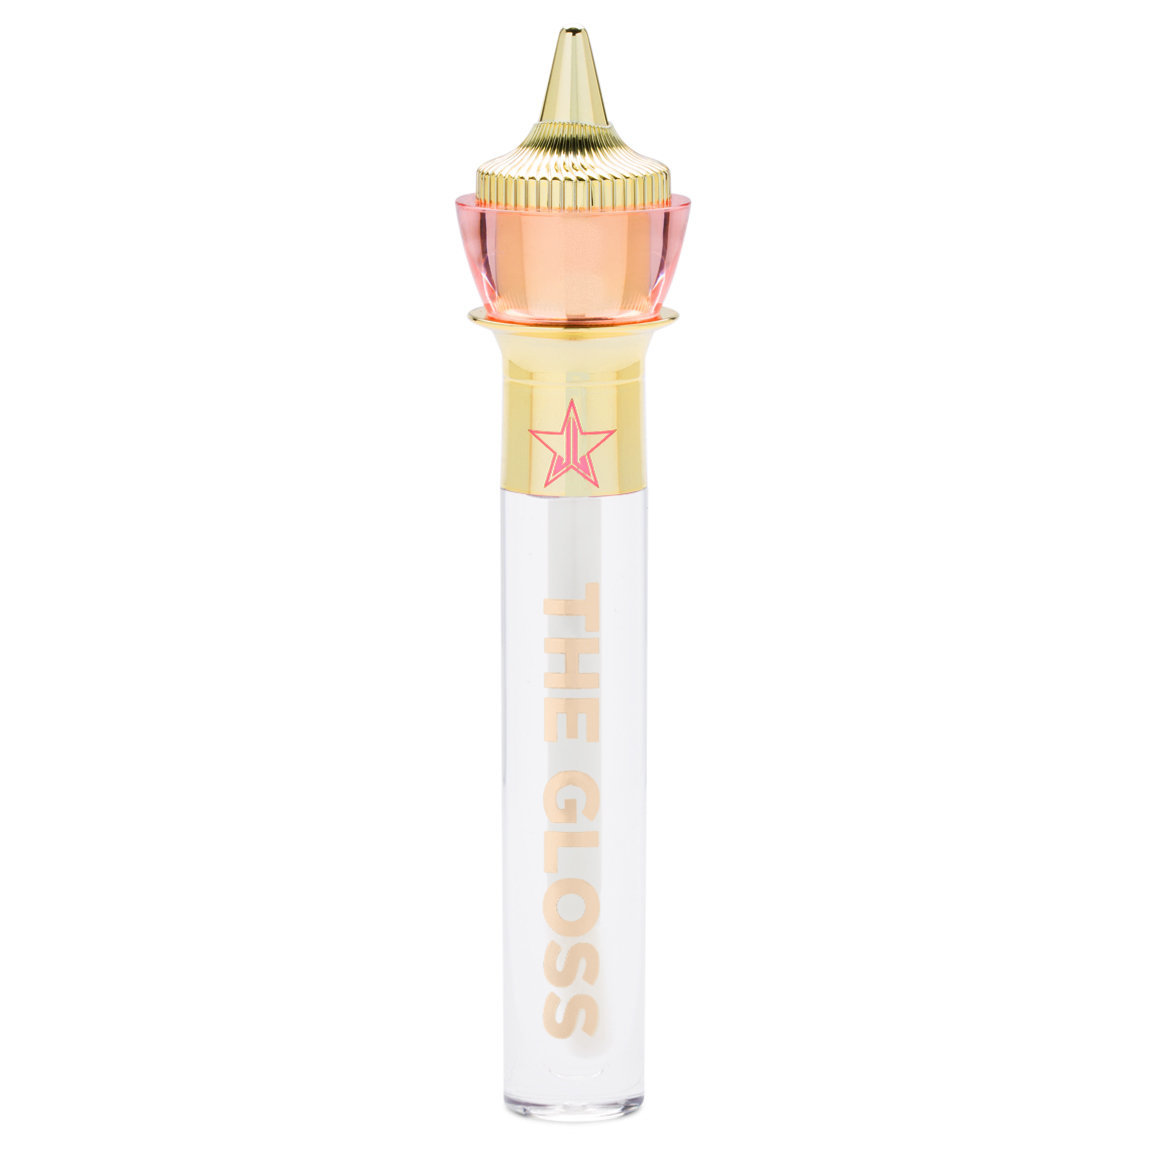 Jeffree Star Cosmetics The Gloss Let Me Be Perfectly Clear alternative view 1.